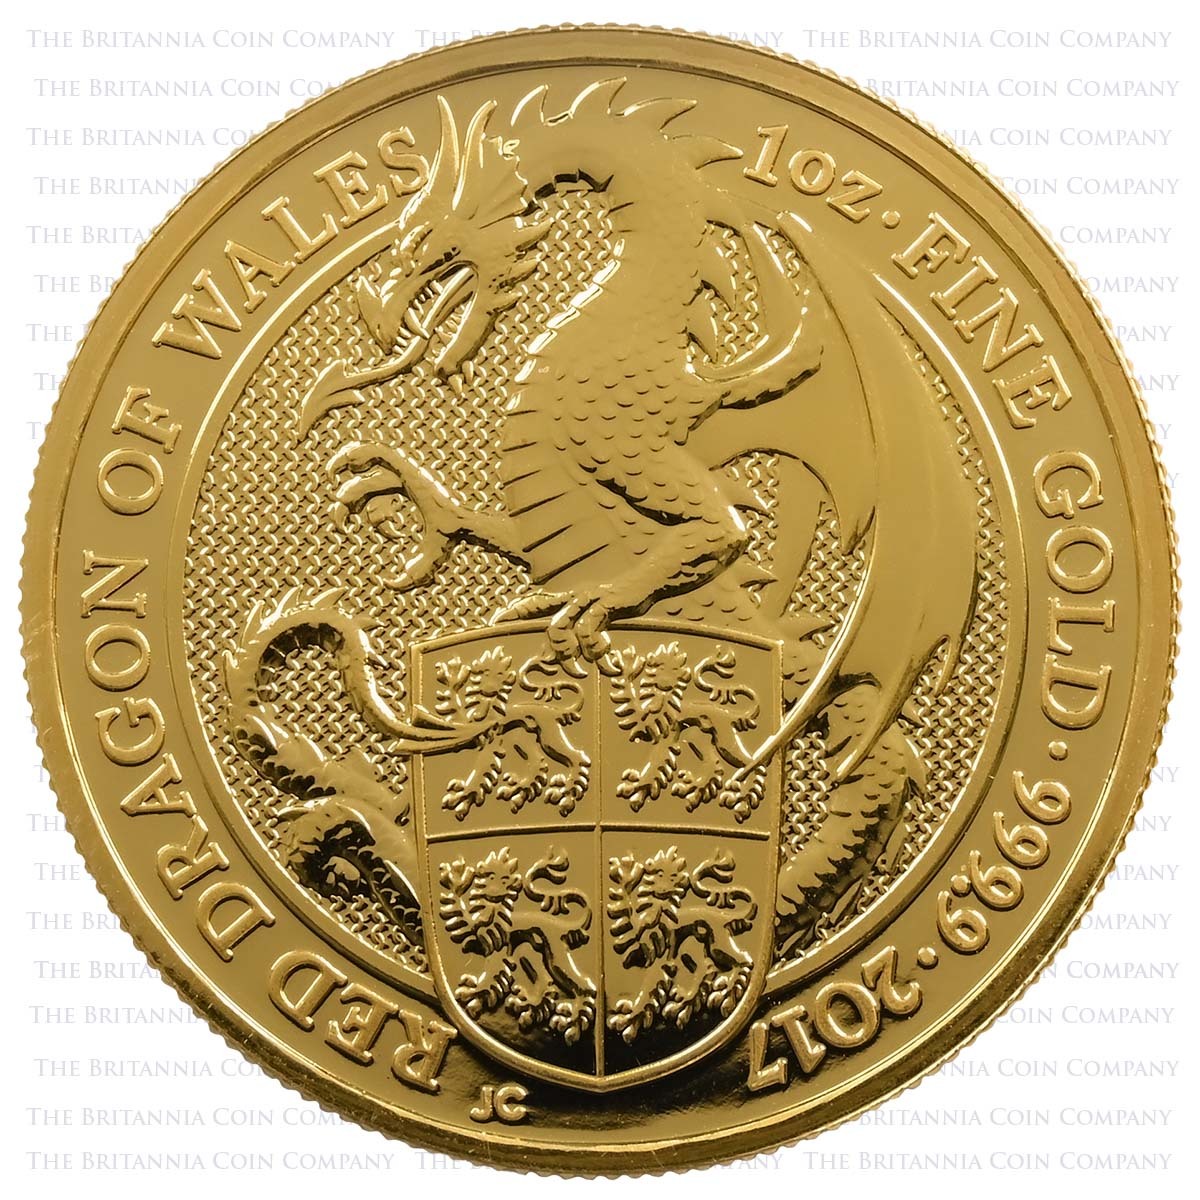 2017 Queen’s Beasts Red Dragon of Wales 1 Ounce Gold Bullion Reverse